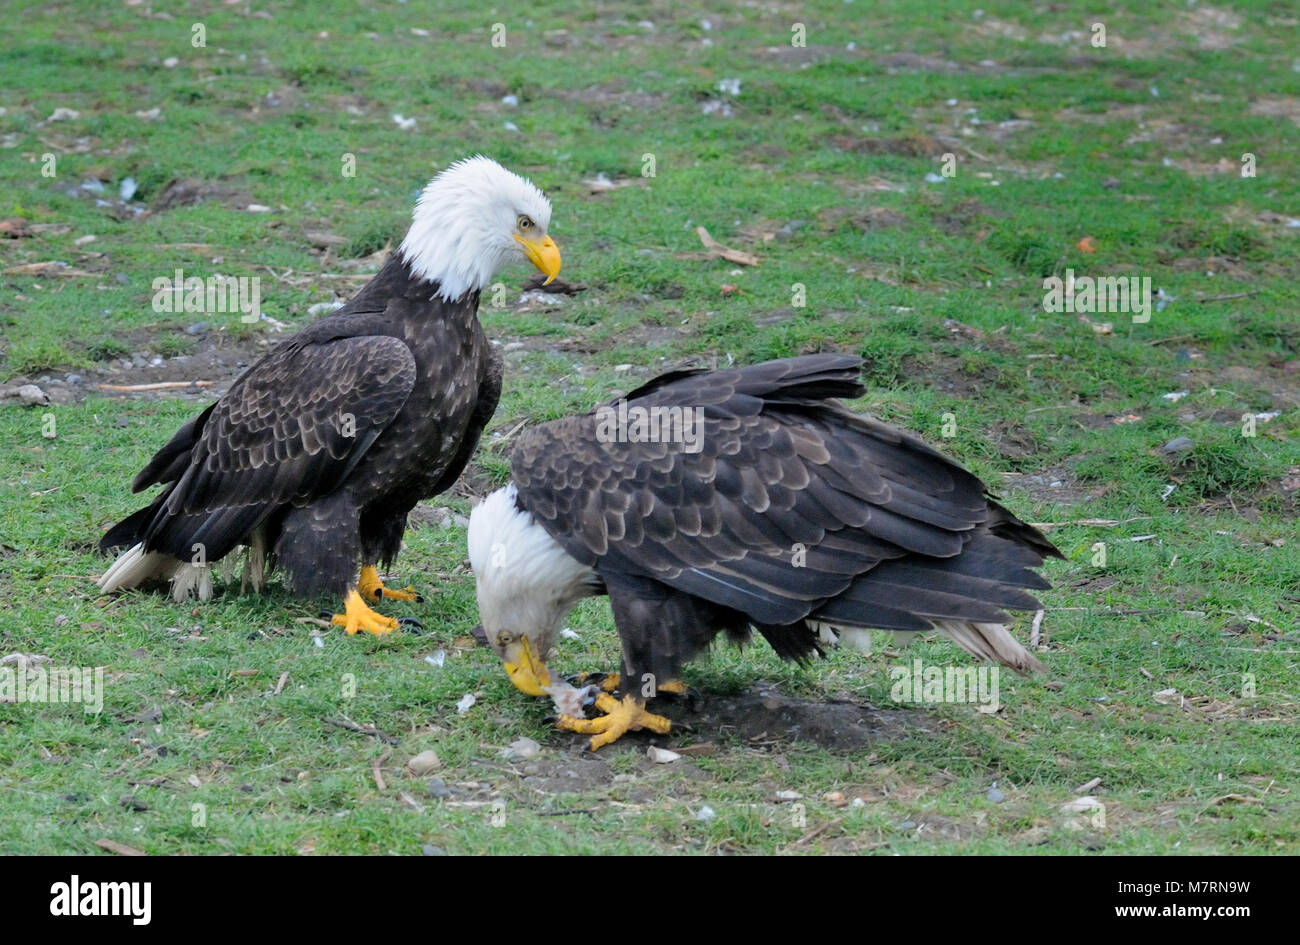 Two mature bald eagles vying for fish scraps, Courtenay, Vancouver Island, British Columbia, Canada. Stock Photo